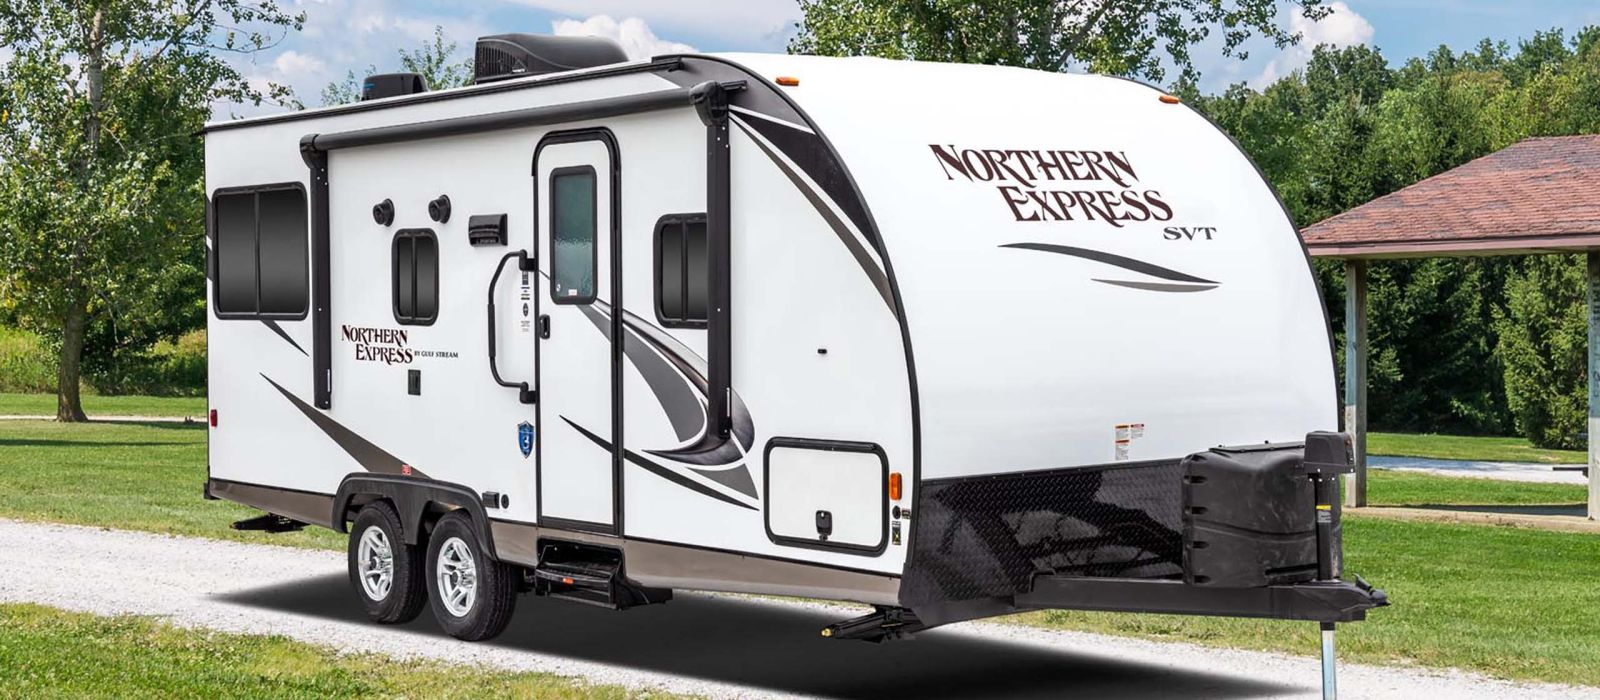 Side angle view of Gulfstream Northern Express lightweight travel trailer